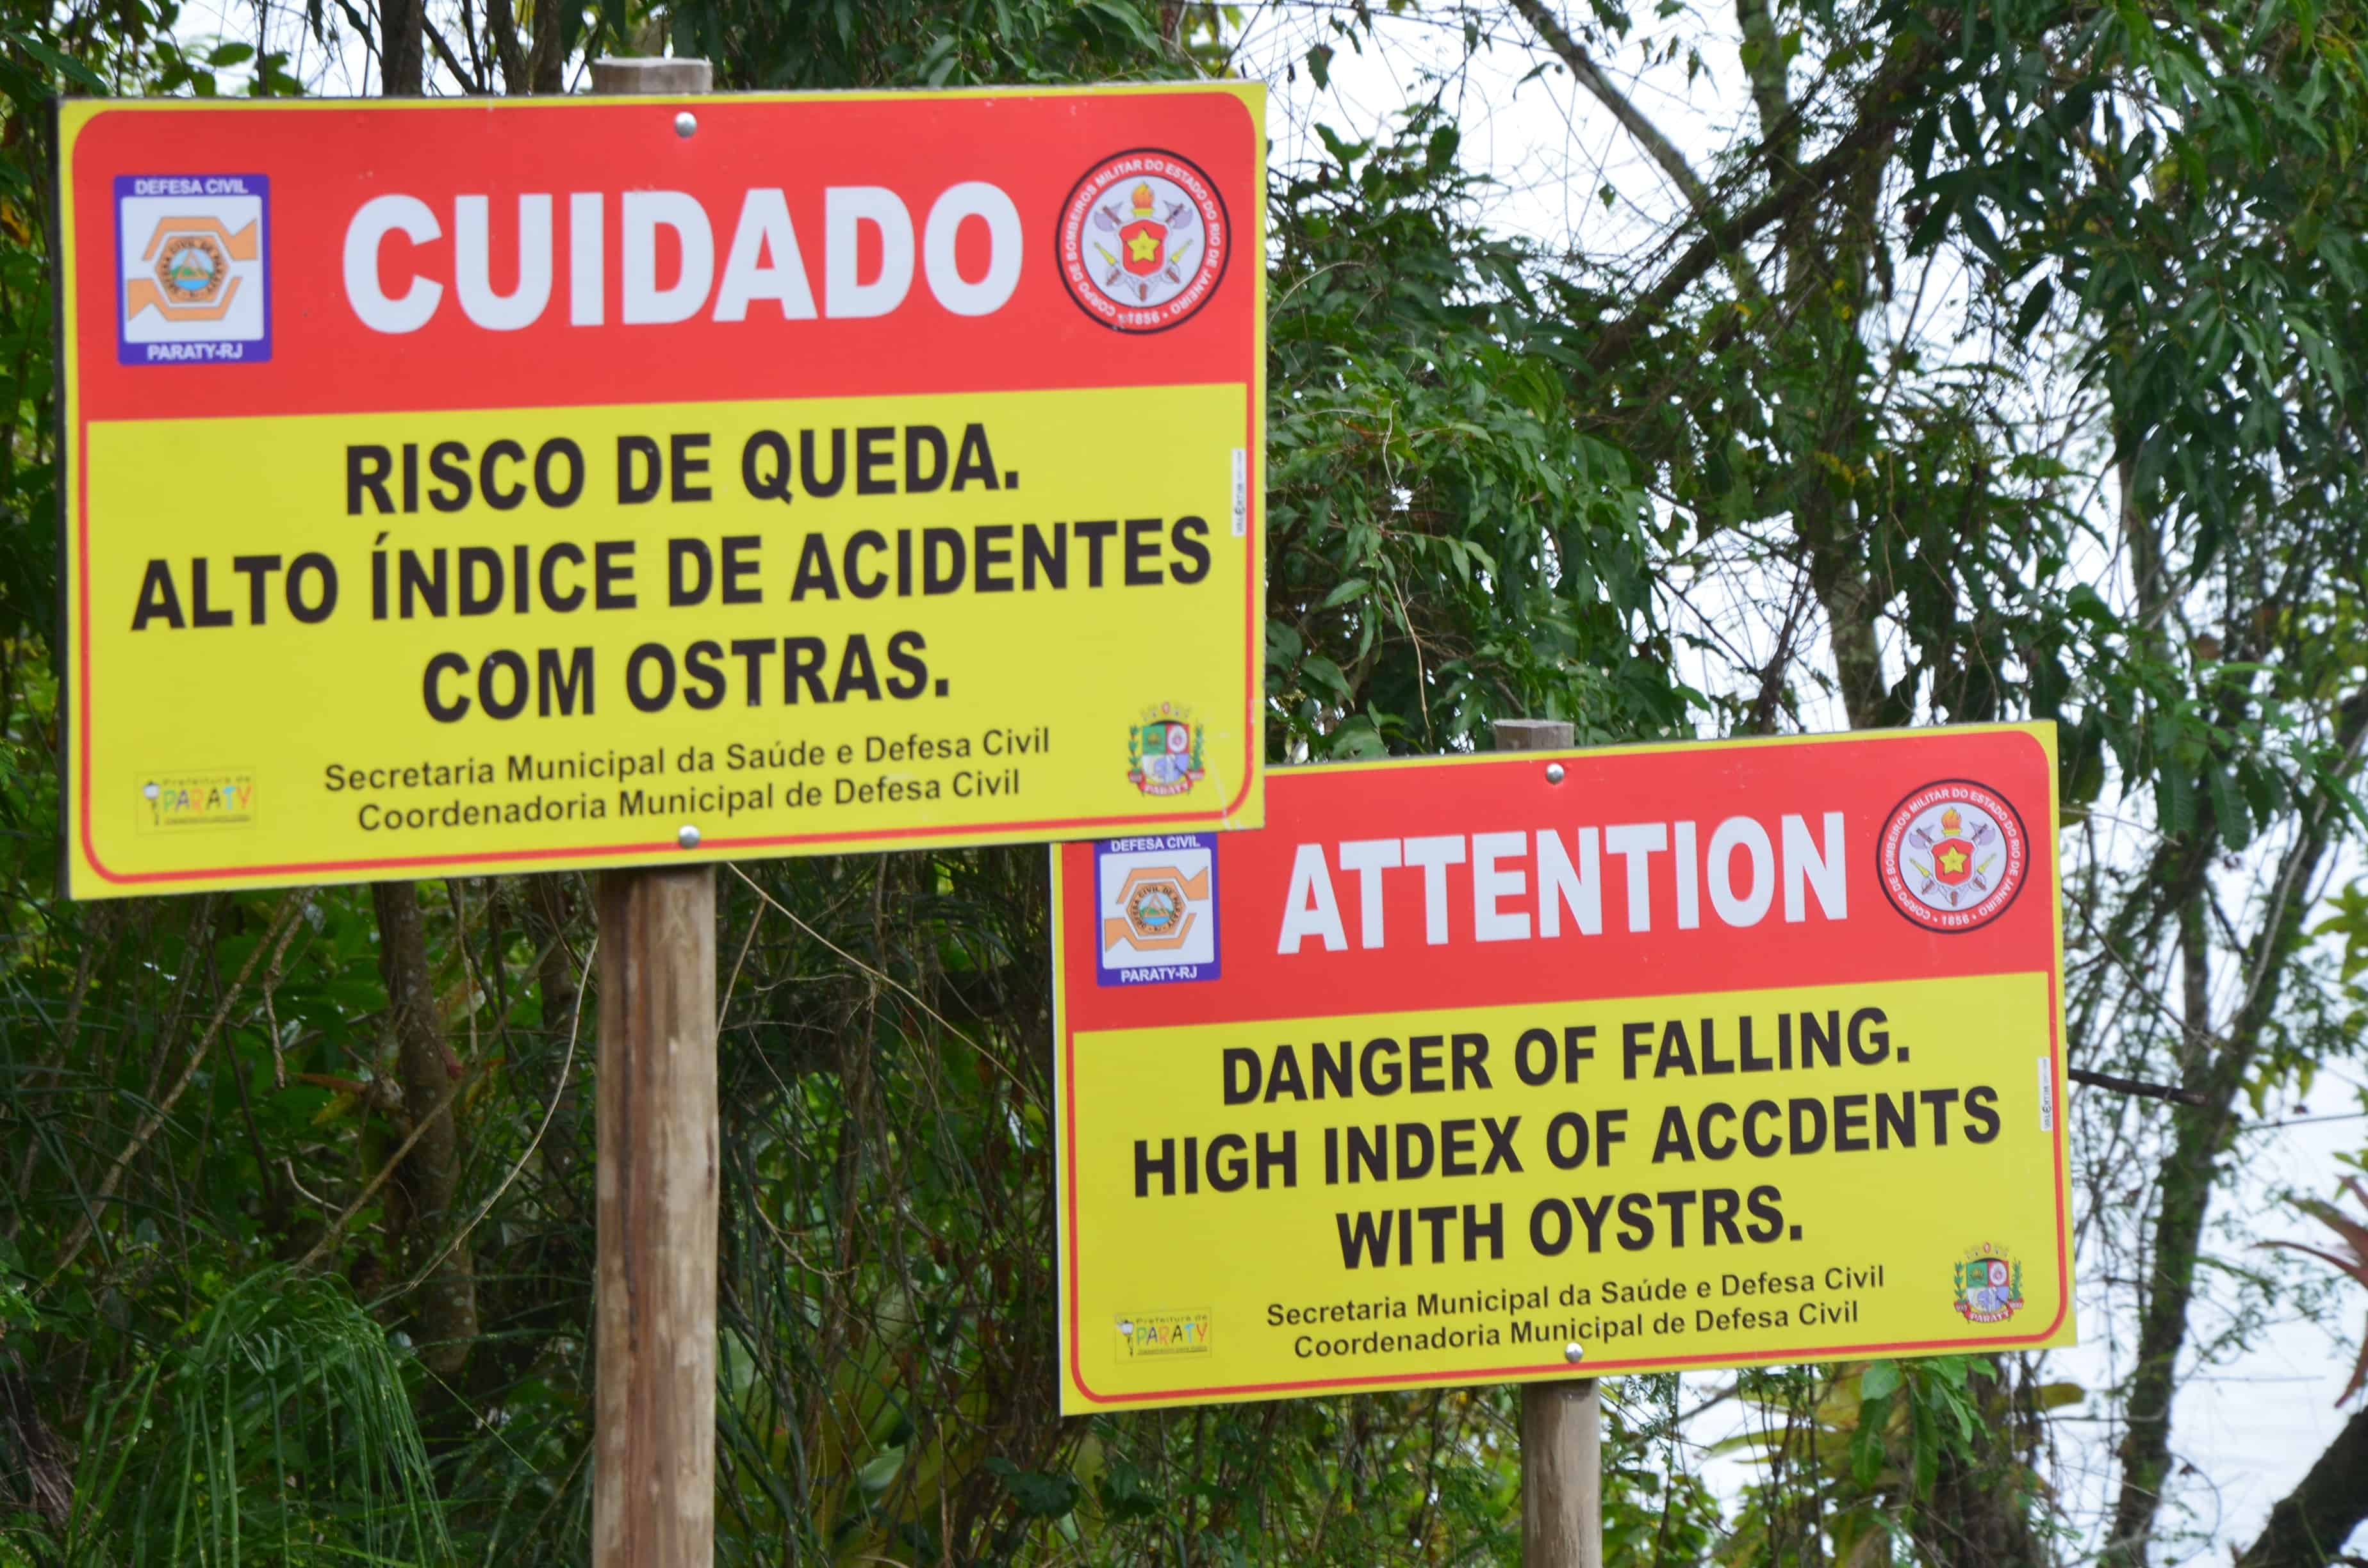 Oyster warning! Forte Defensor Perpétuo in Paraty, Brazil